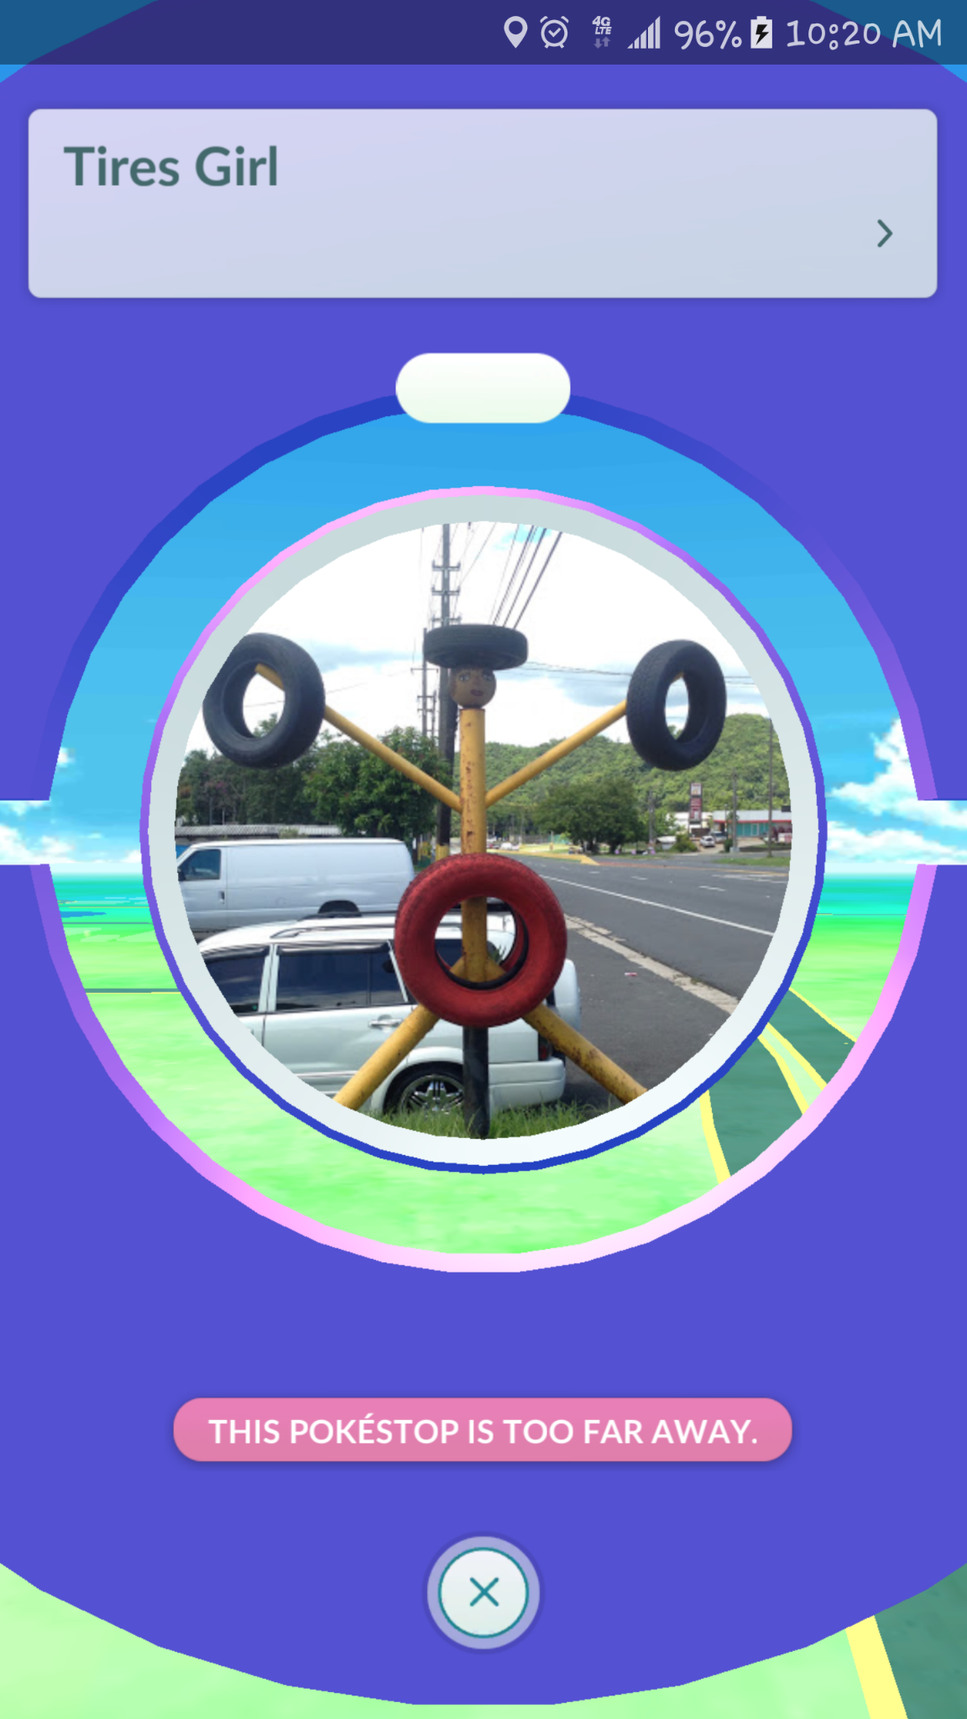 I dont understand why this is a poke stop - meme